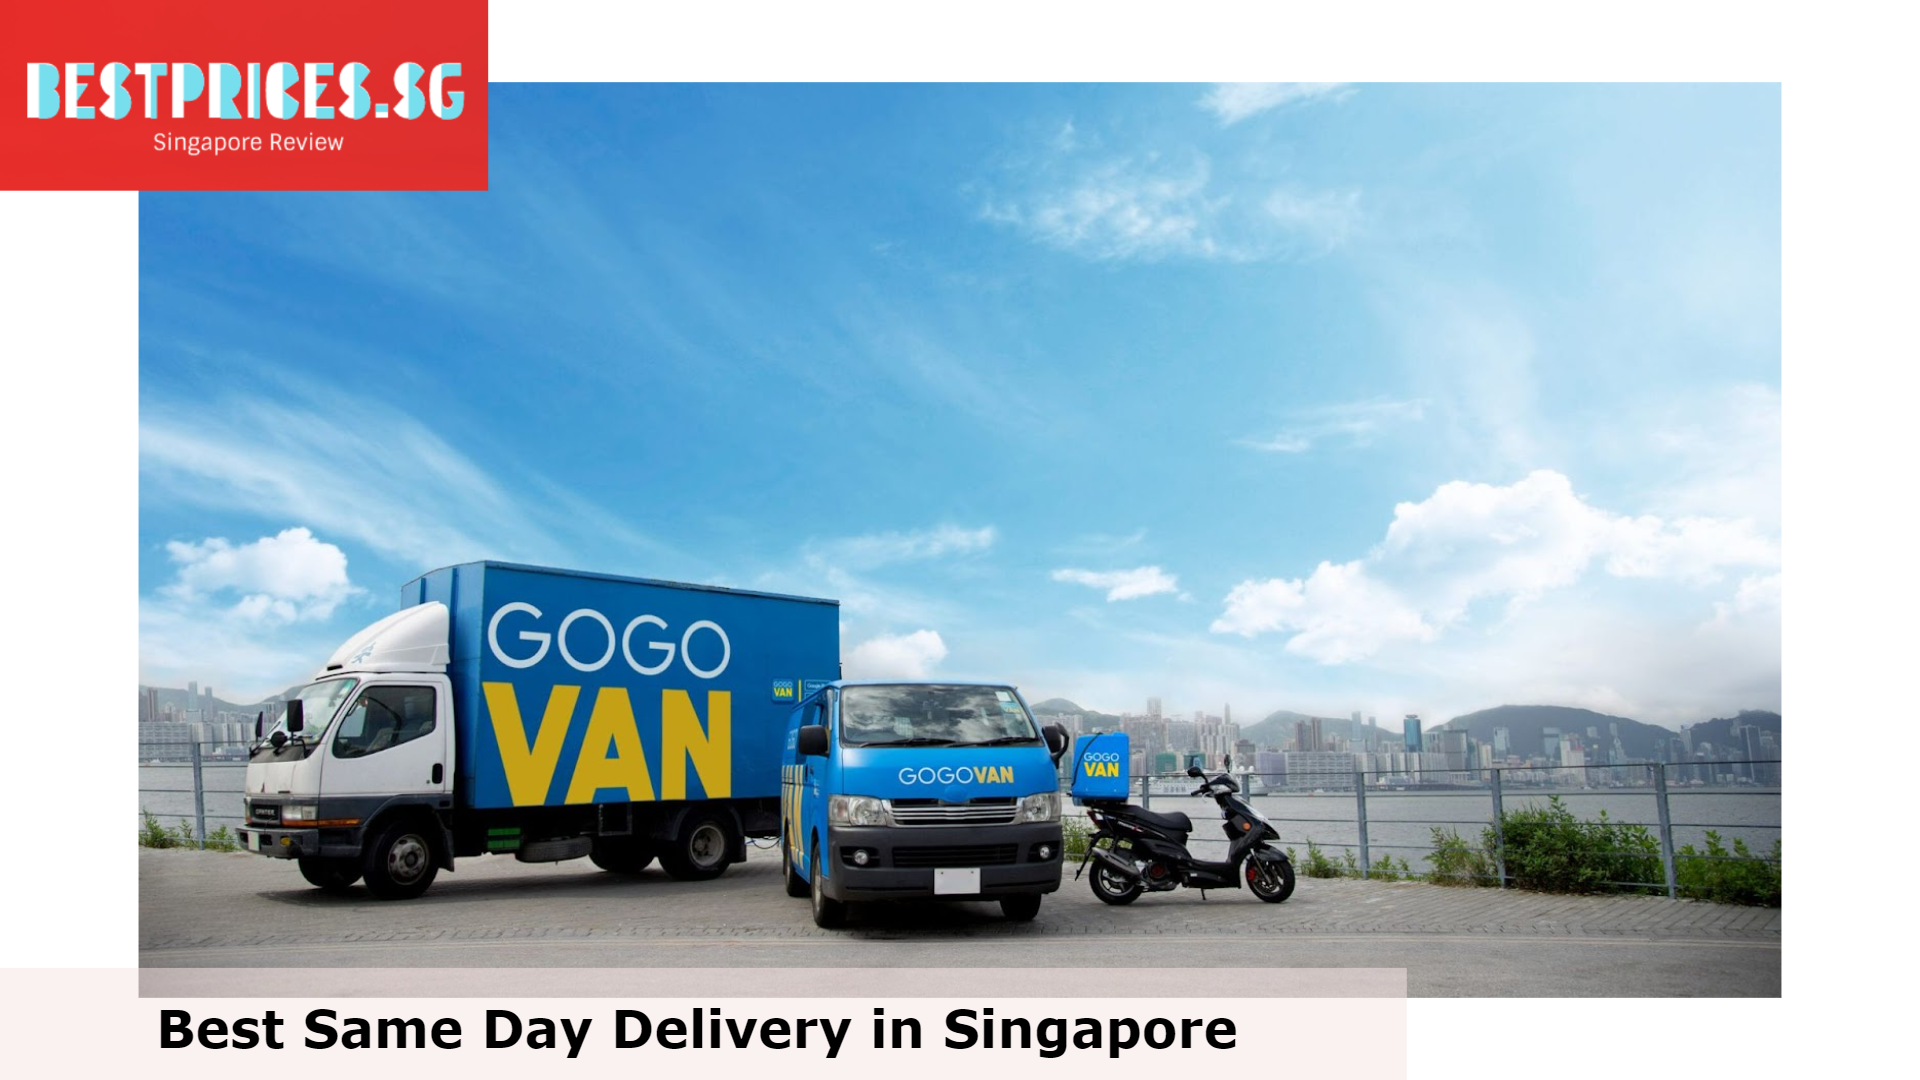 GoGoX - Best Same Day Delivery in Singapore, Same Day Delivery Singapore, Express Delivery in 1 hour, Same Day Delivery Courier Options In Singapore, Same-Day Delivery Gifts In Singapore, Best Courier Services in Singapore, Which delivery app is the cheapest Singapore?, Which courier service has lowest fees?, cheapest same day delivery singapore, same day delivery singapore gifts, same day delivery online shopping singapore, same day delivery singapore food, birthday gift same day delivery singapore, door to door delivery singapore, same day delivery singapore cake, same day delivery singapore flowers, 